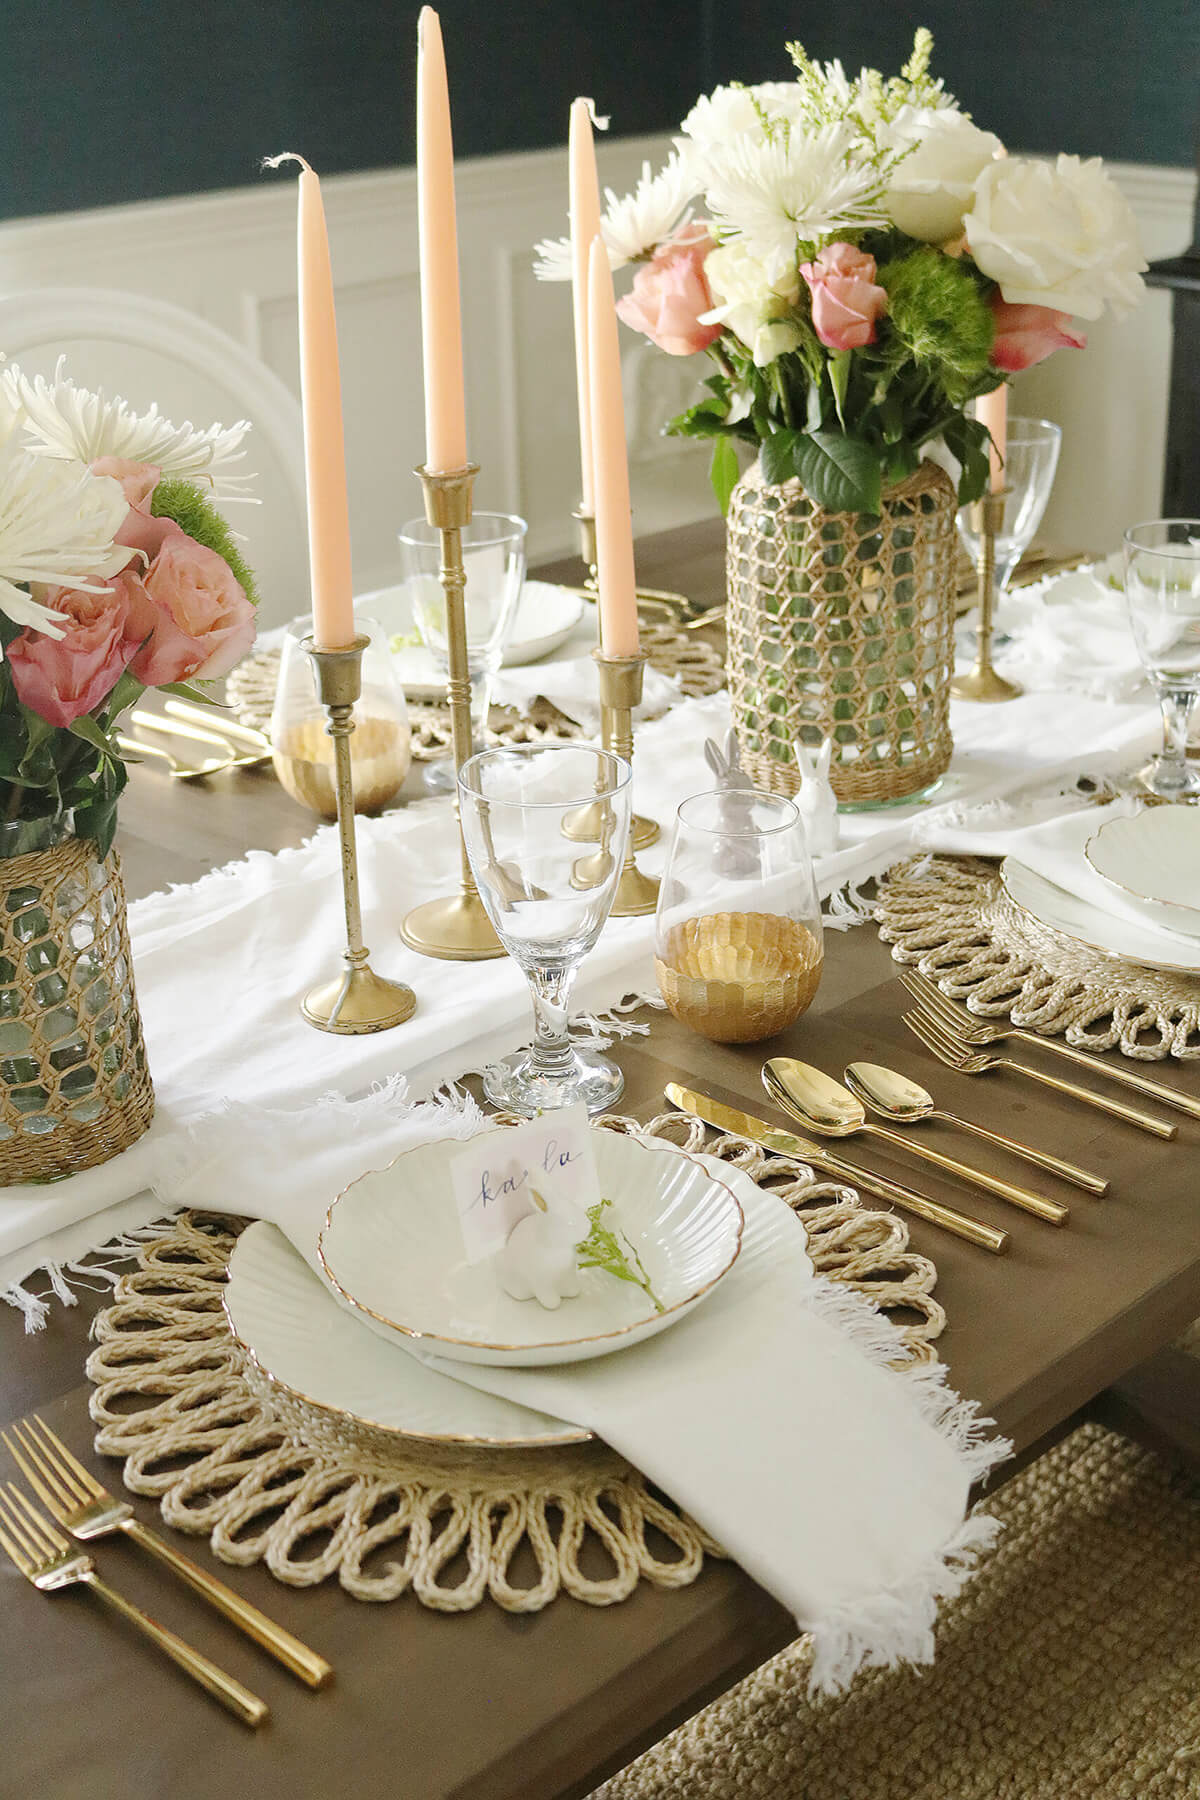 Fashionable and Vibrant Easter Table Design